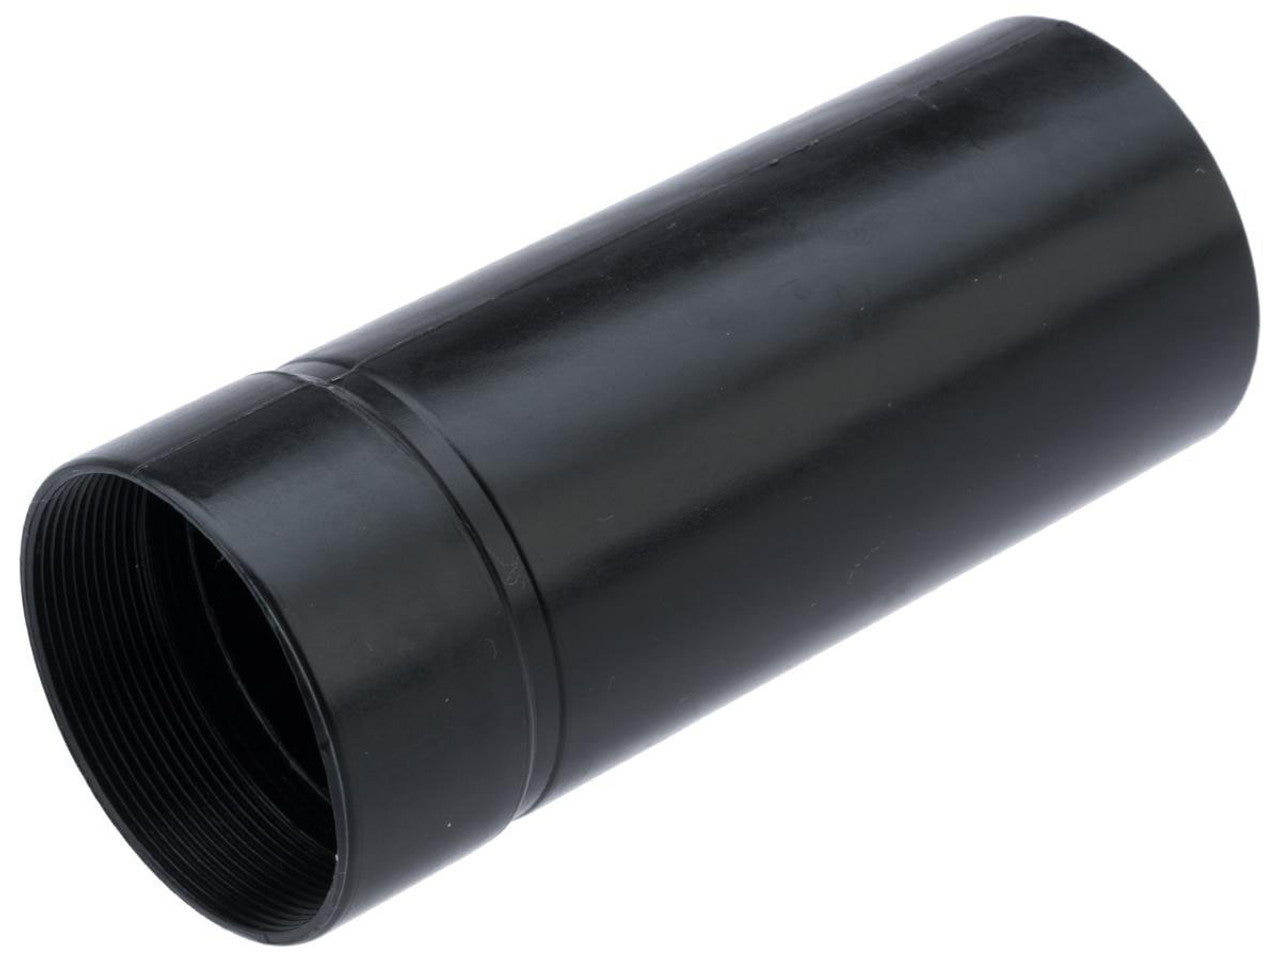 TAGINN Replacement Tube for "Shell/PRO/Multi-R" M203 Launcher Shells